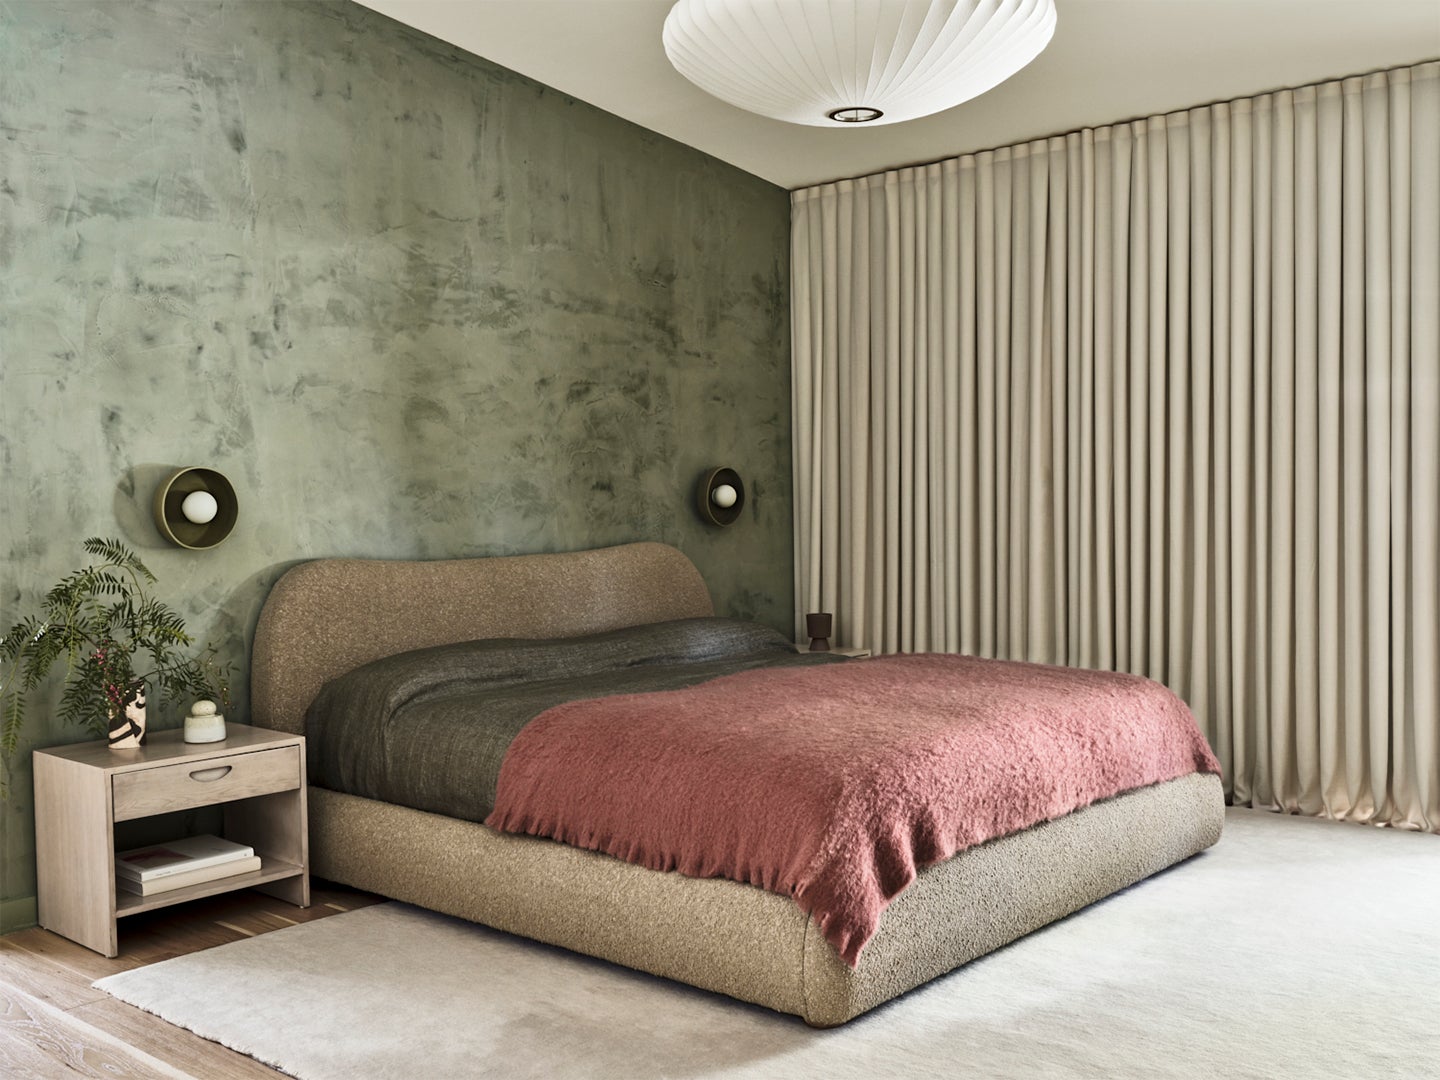 Bedroom with green walls and berry-coloured furnishings